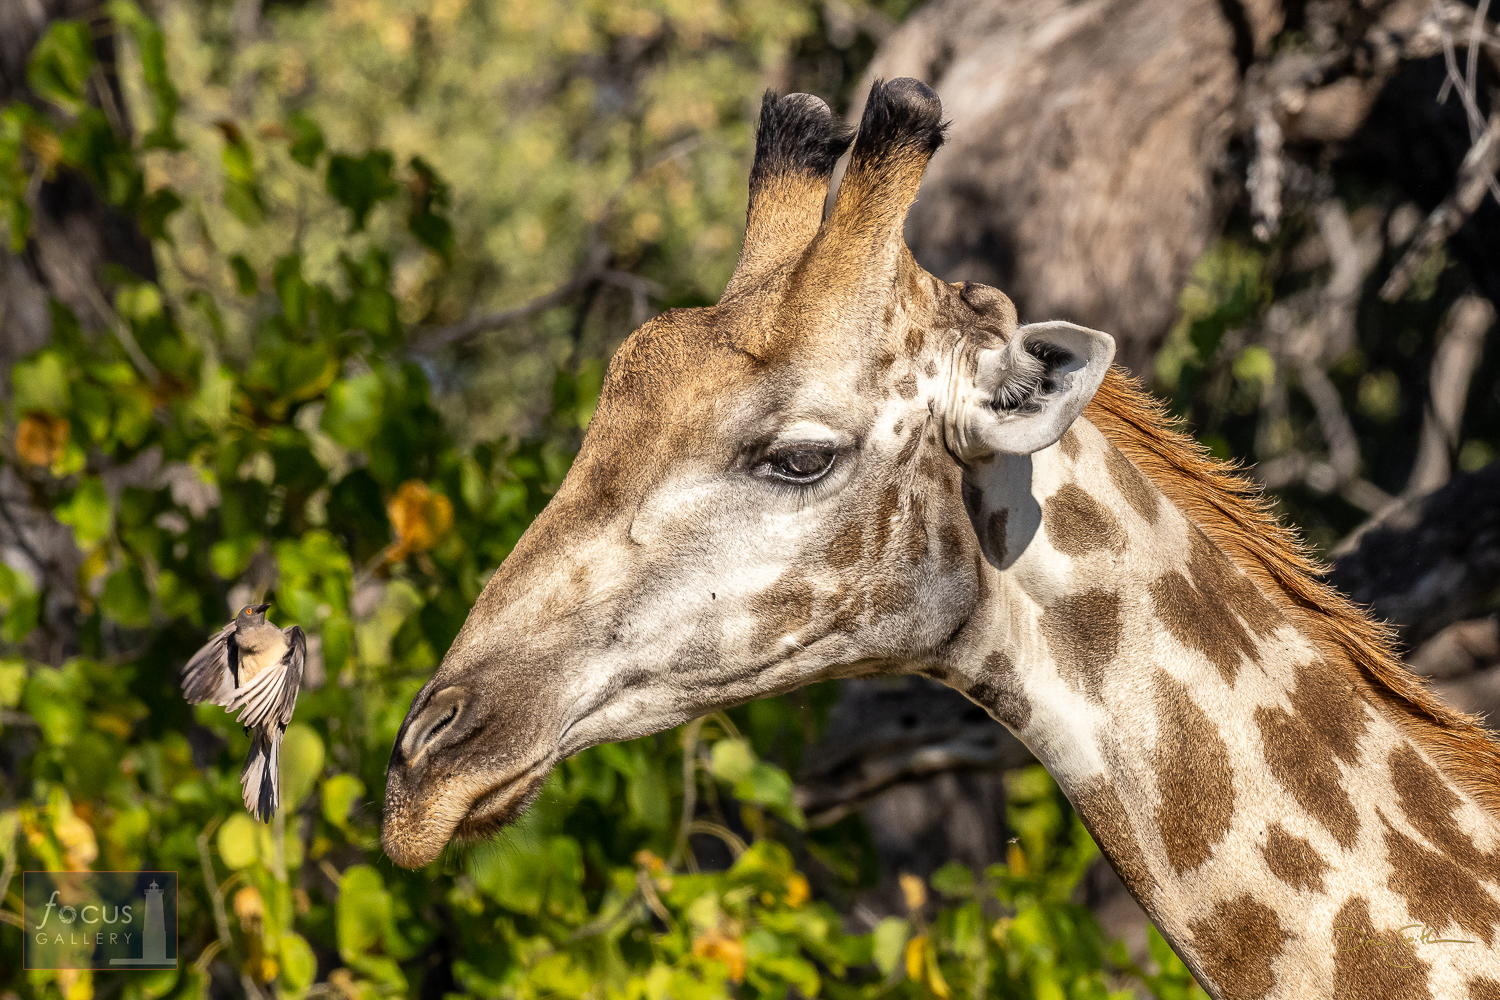 A Red-billed Oxpecker and Southern Giraffe have a little staring contest mid-air.  (Actually, the oxpecker is just looking for...